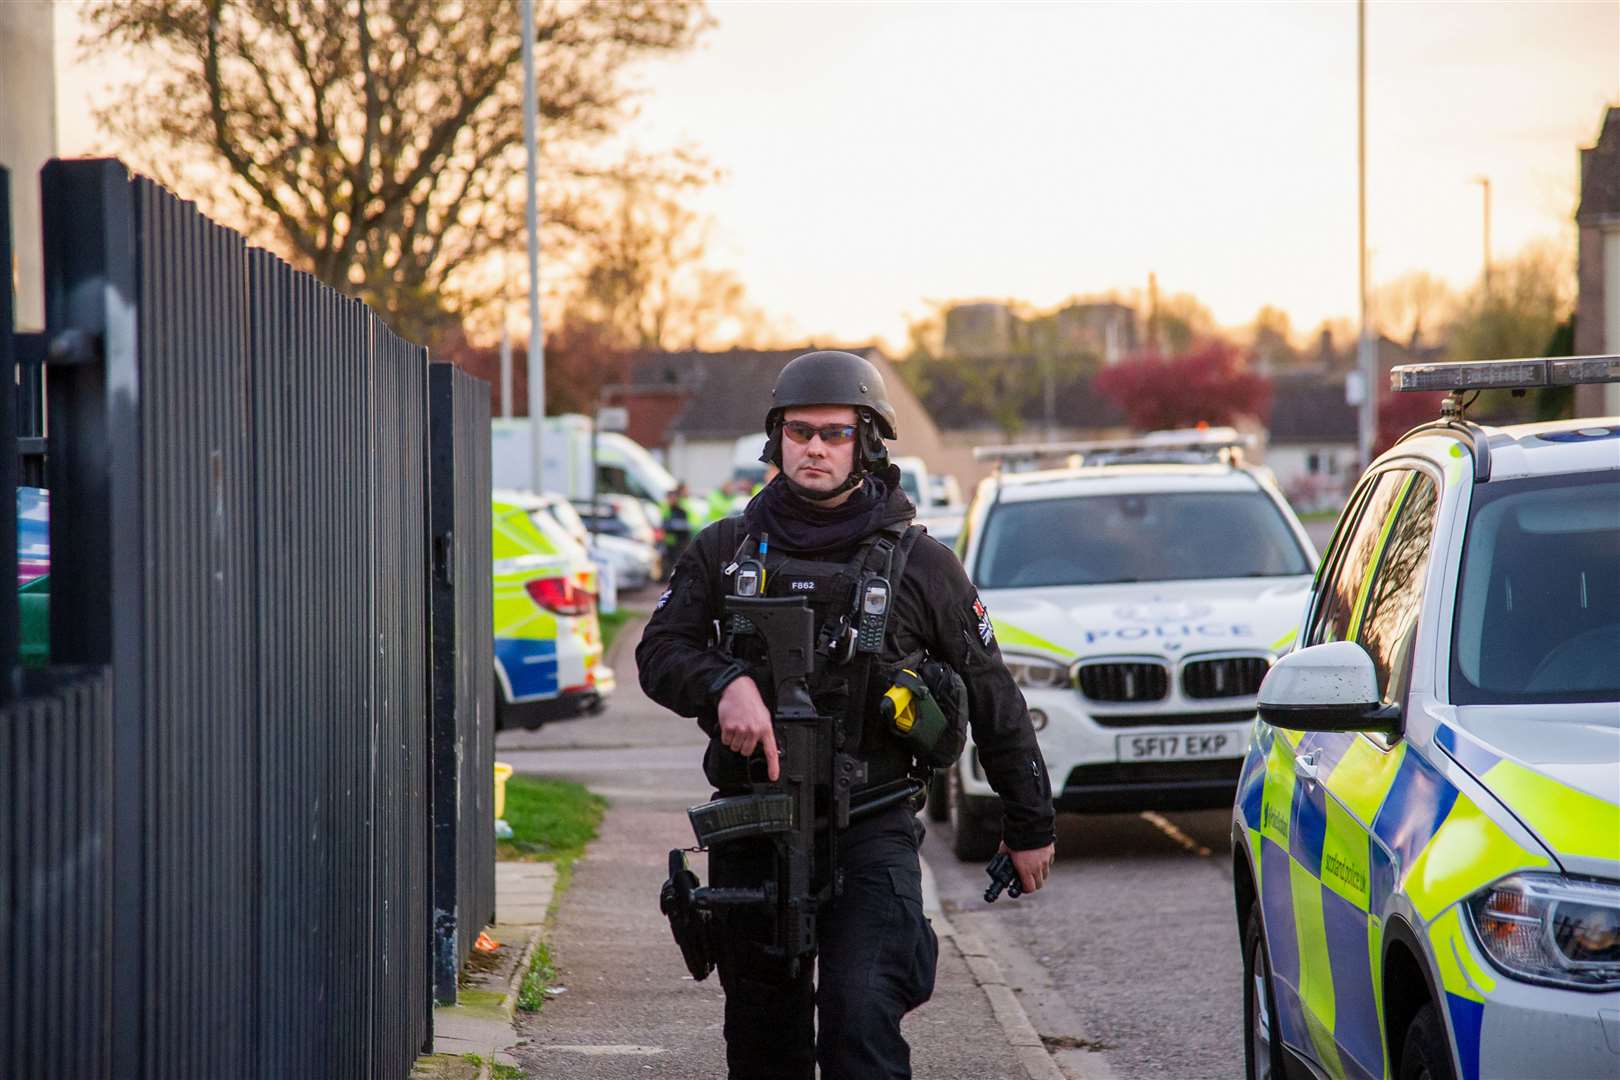 An armed police officer at an incident last year. Picture: Highland News & Media.